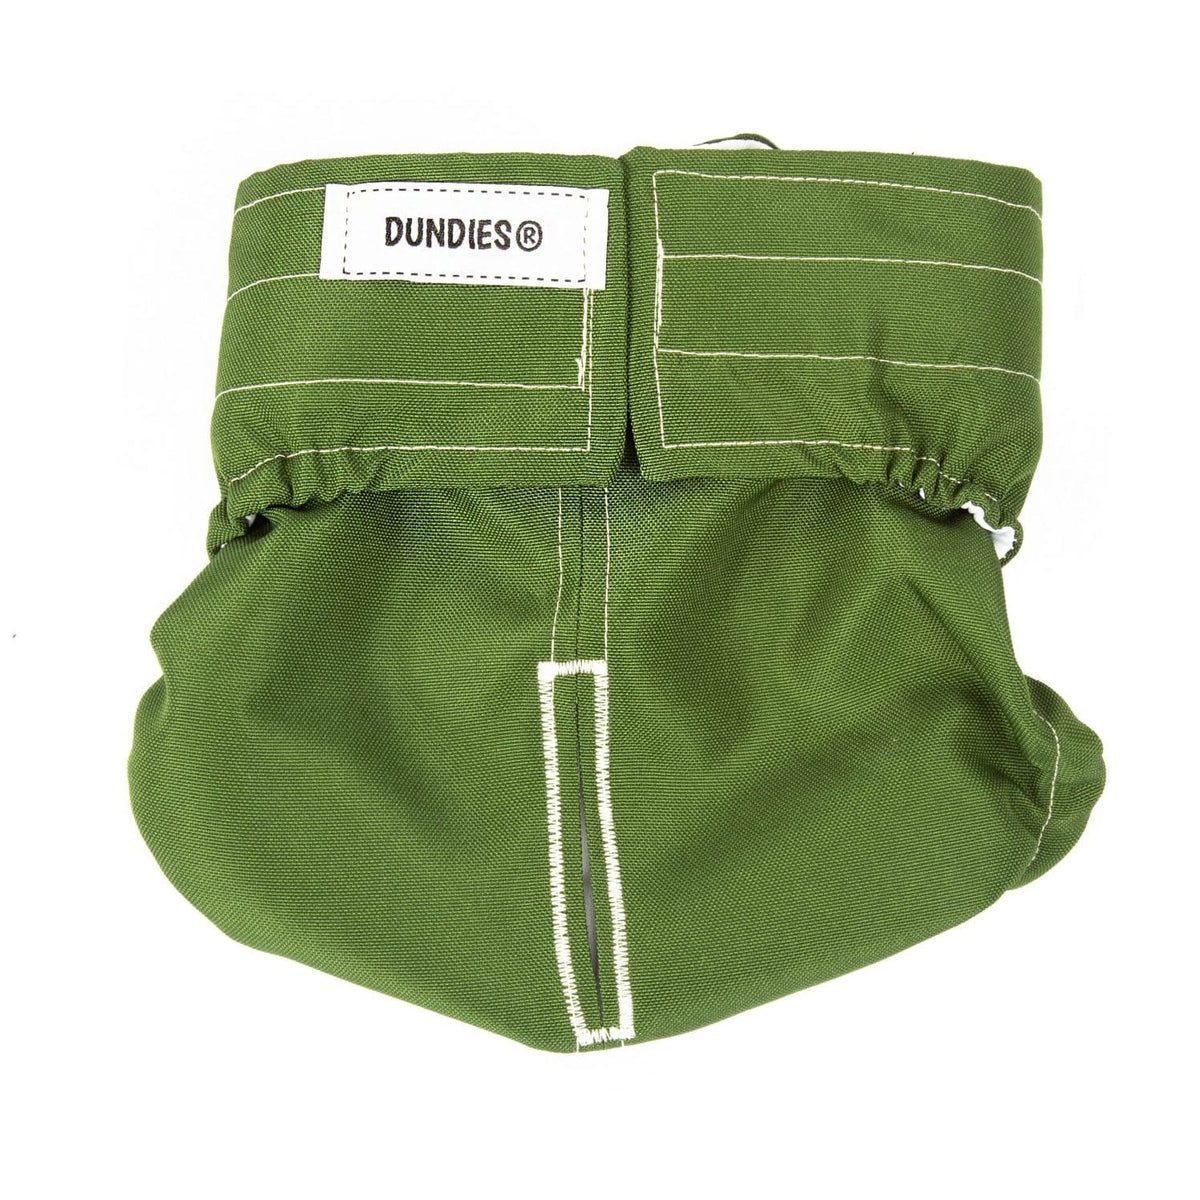 Dundies Forrest Snappie-Dundies Australia - Vet Recommended Pet Nappies